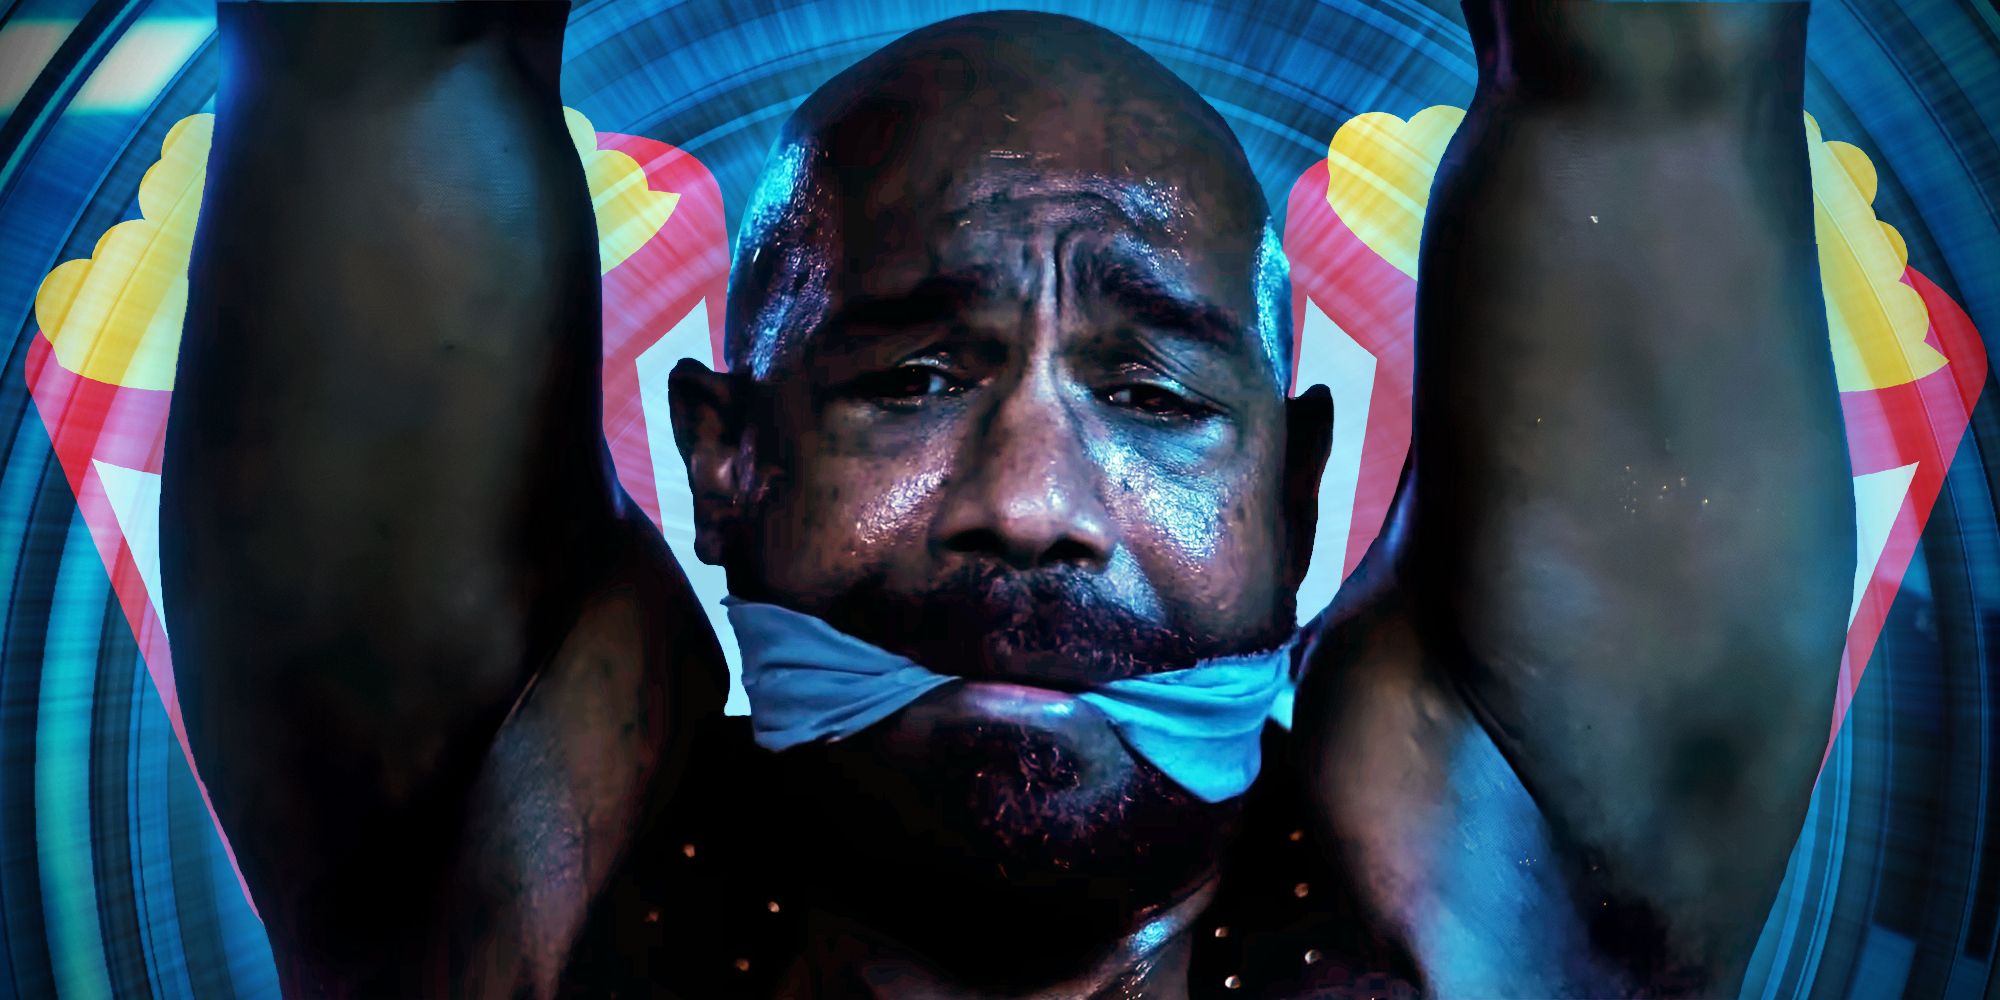 Michael Beach in Saw X's Post-Credits Scene with Rotten Tomatoes Popcorn Buckets In The Background